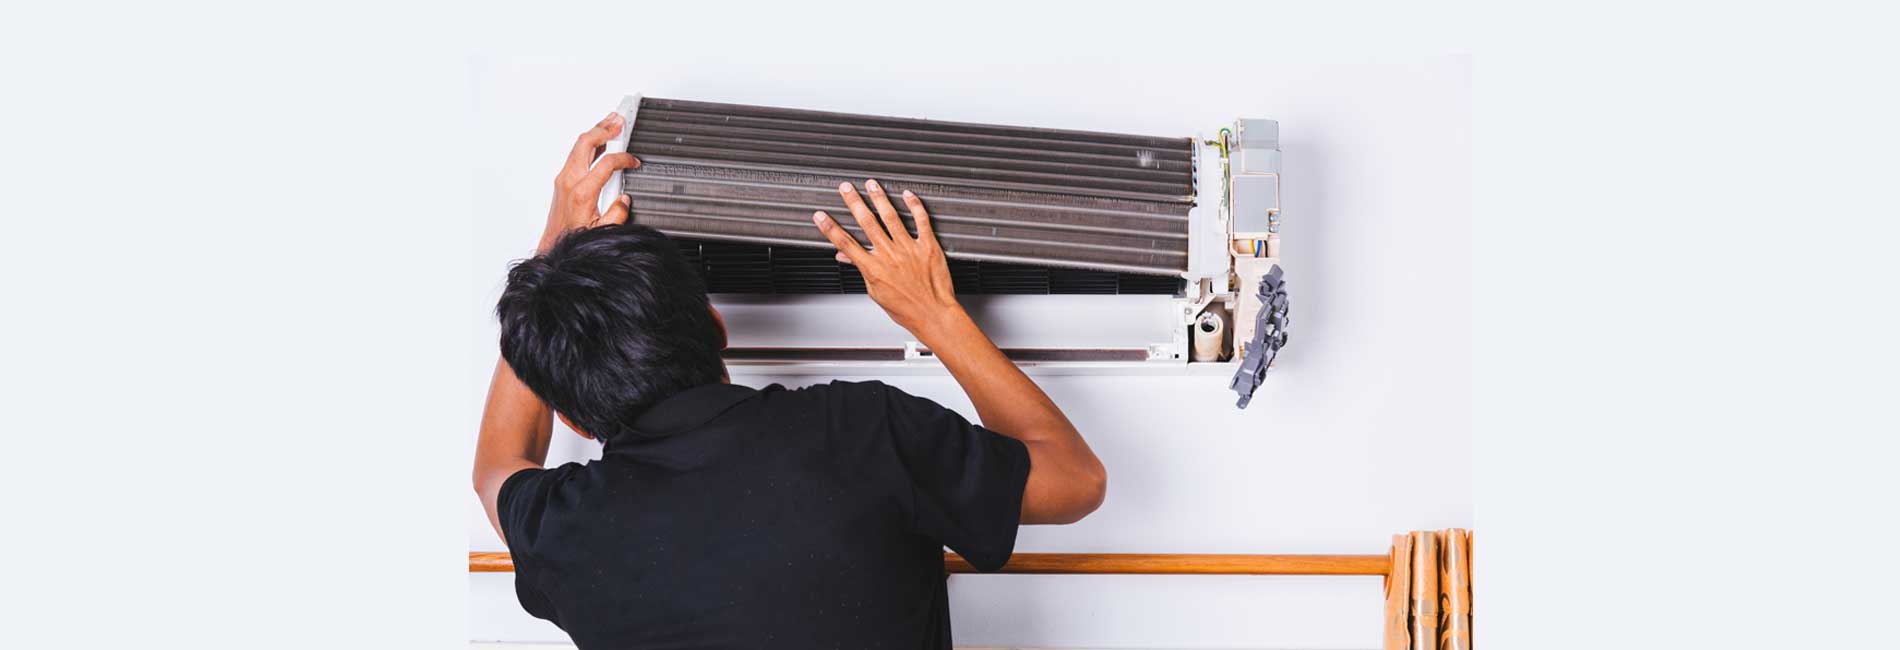 Why Should You Call Professionals for AC Tune-Up and Repairs?